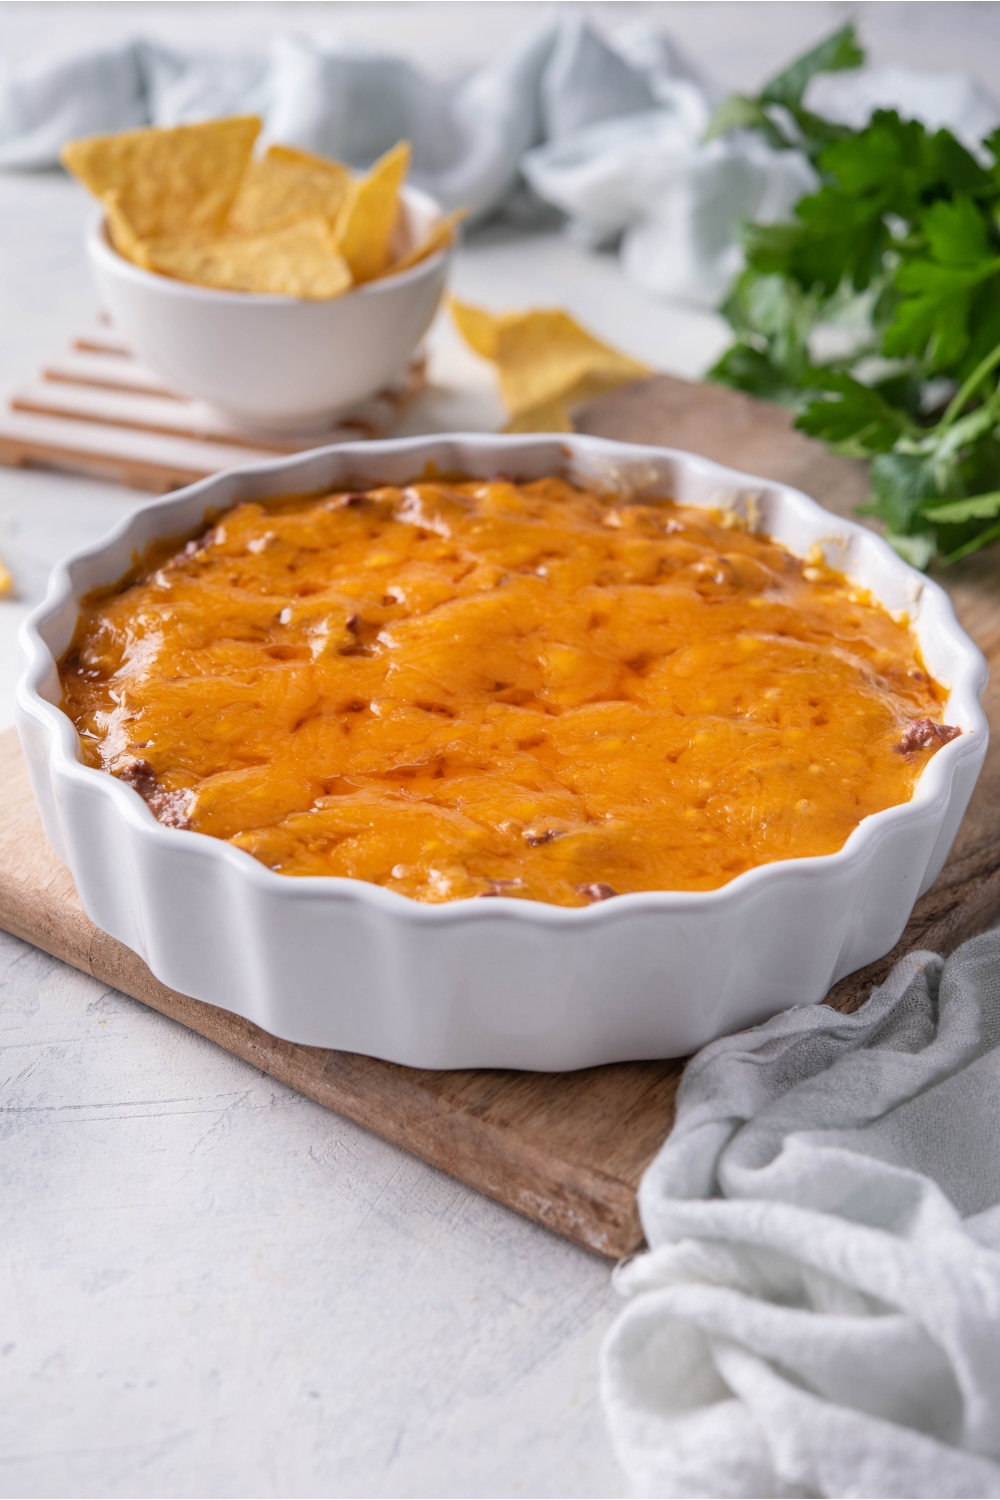 Skyline chili dip in a white serving dish covered in melted cheese. The chili dip is on a wood board and in the background is a bowl of tortilla chips and fresh herbs.